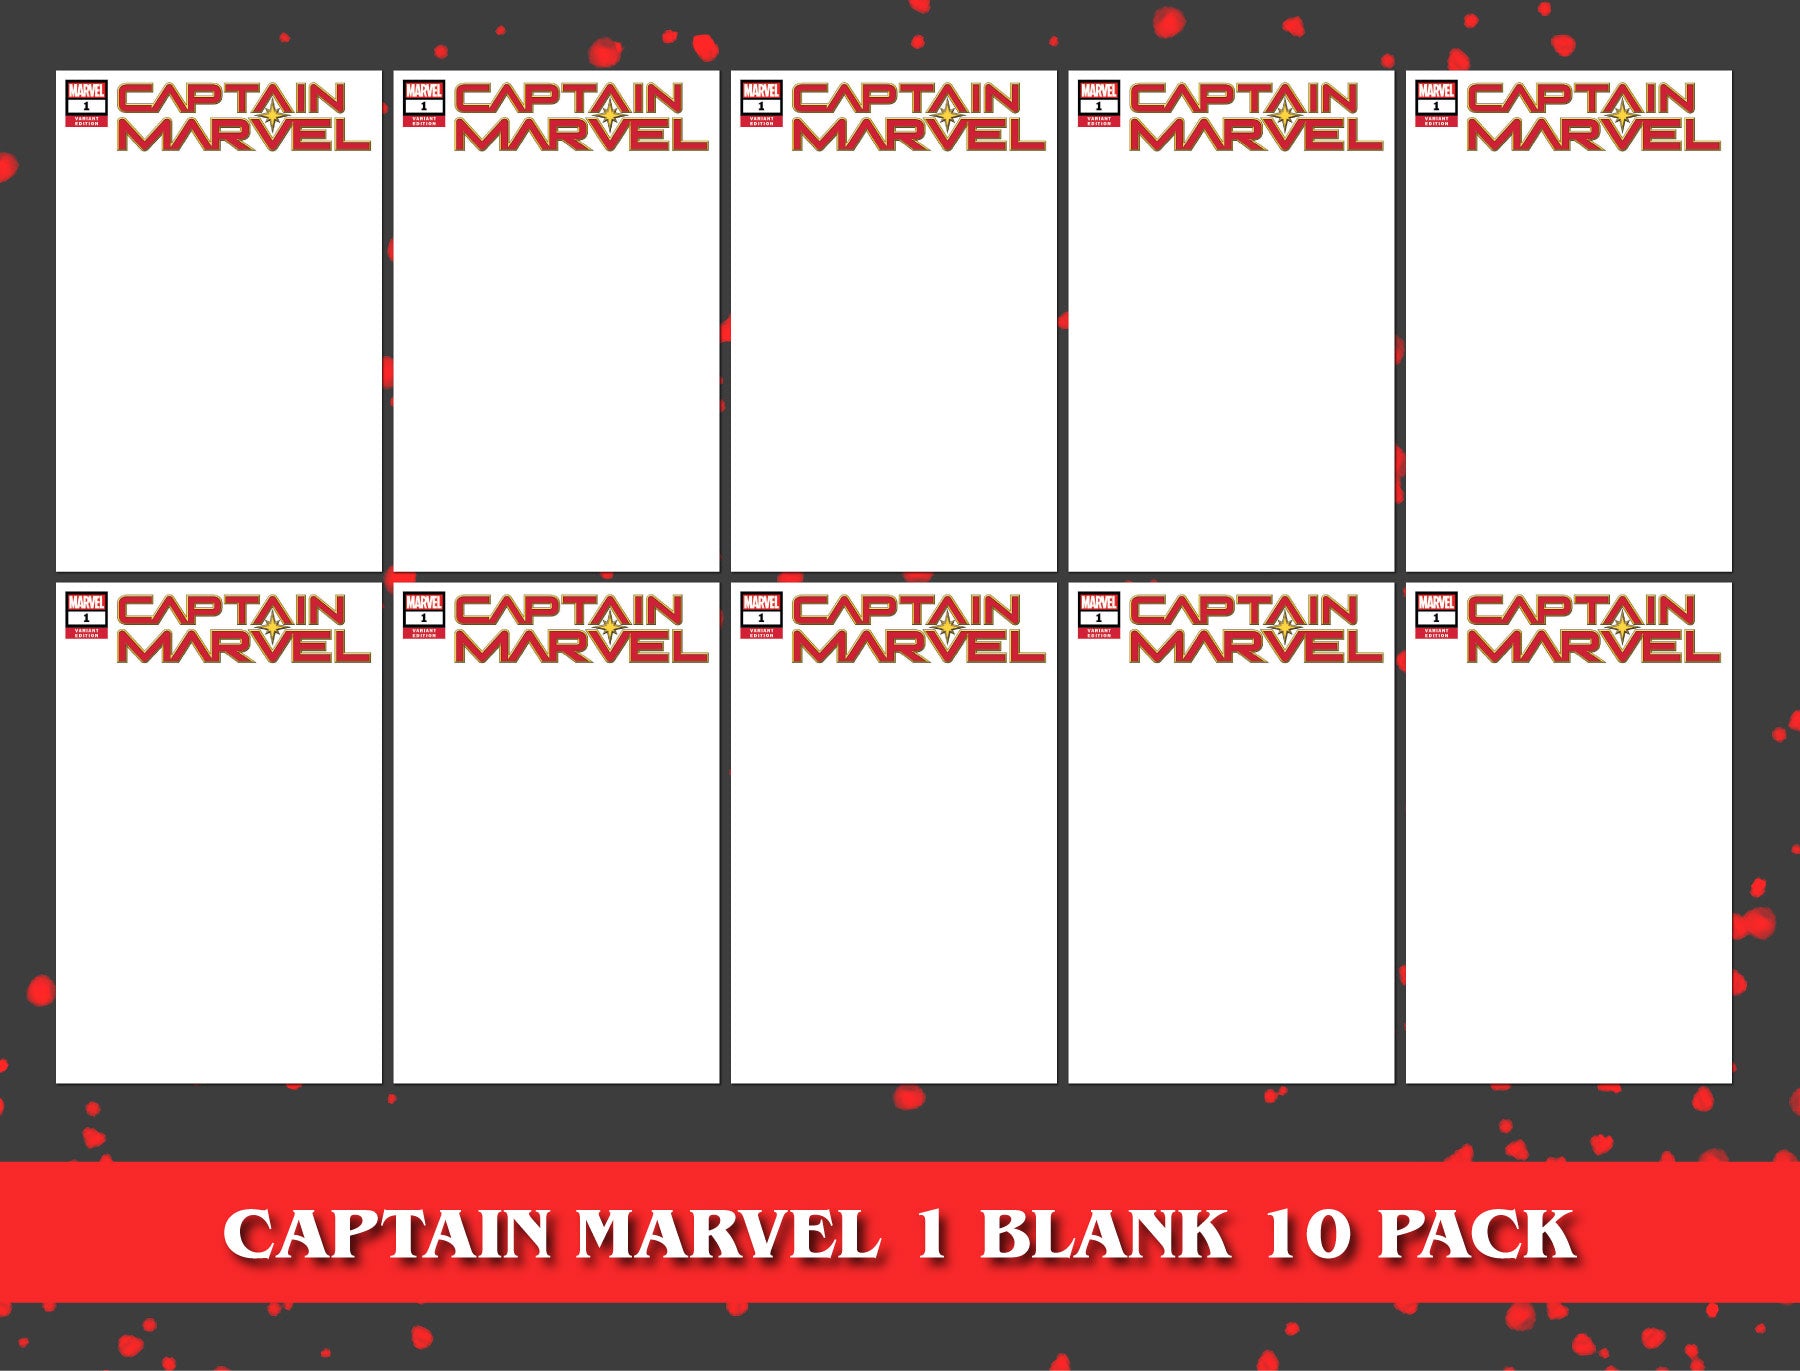 [10 PACK] CAPTAIN MARVEL #1 UNKNOWN COMIC BOOKS BLUERAINBOW EXCLUSIVE BLANK (02/15/2023)